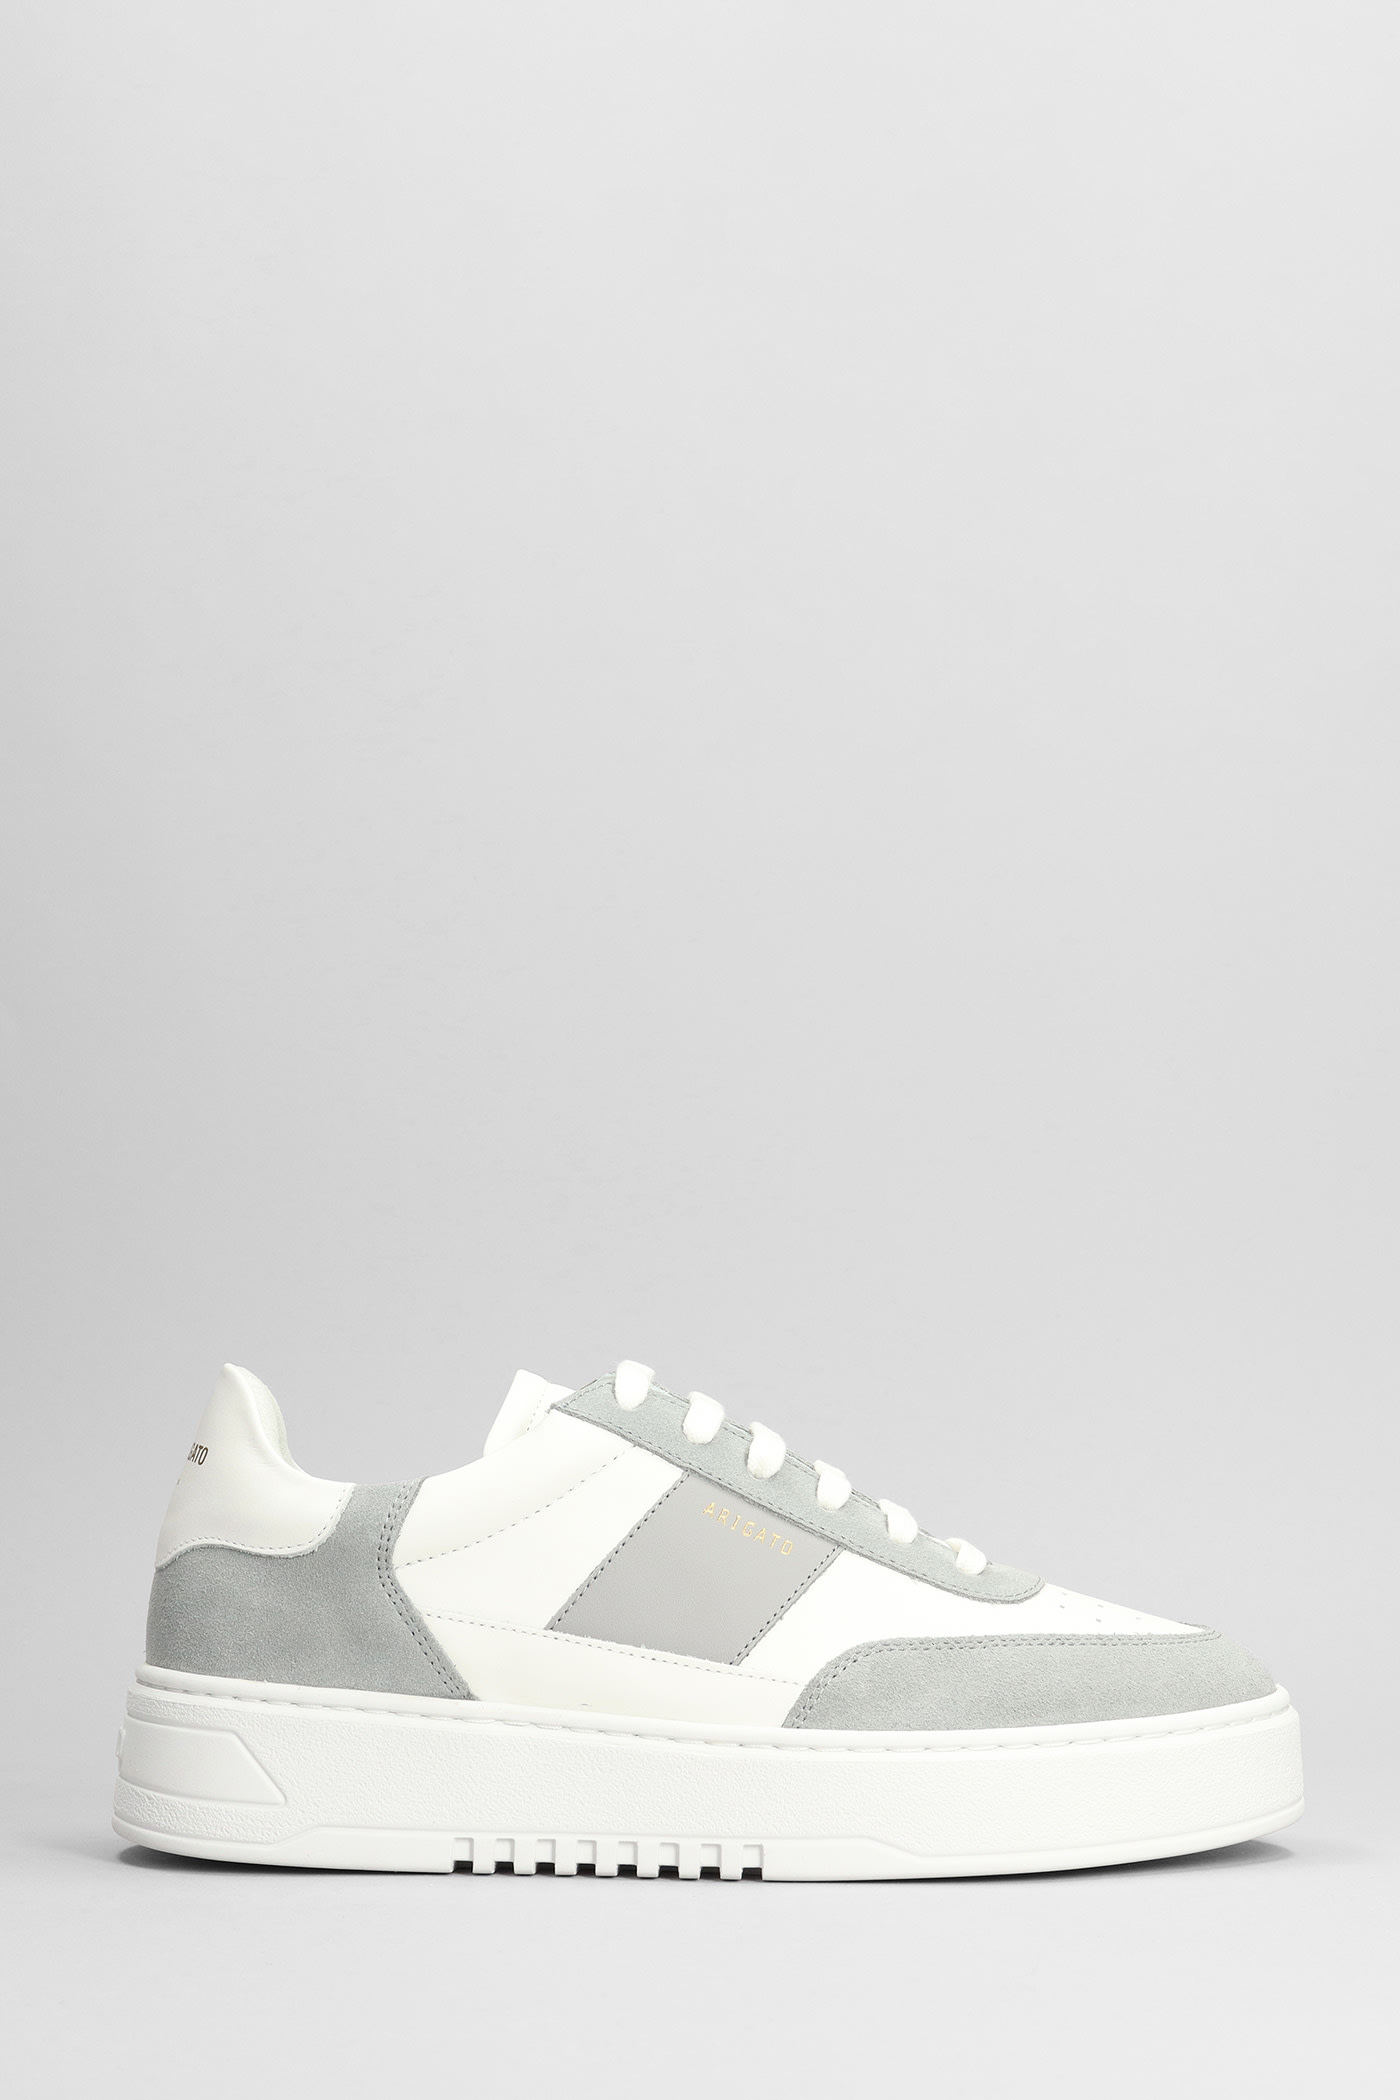 Axel Arigato Orbit Vintage Sneakers In Grey Suede And Leather